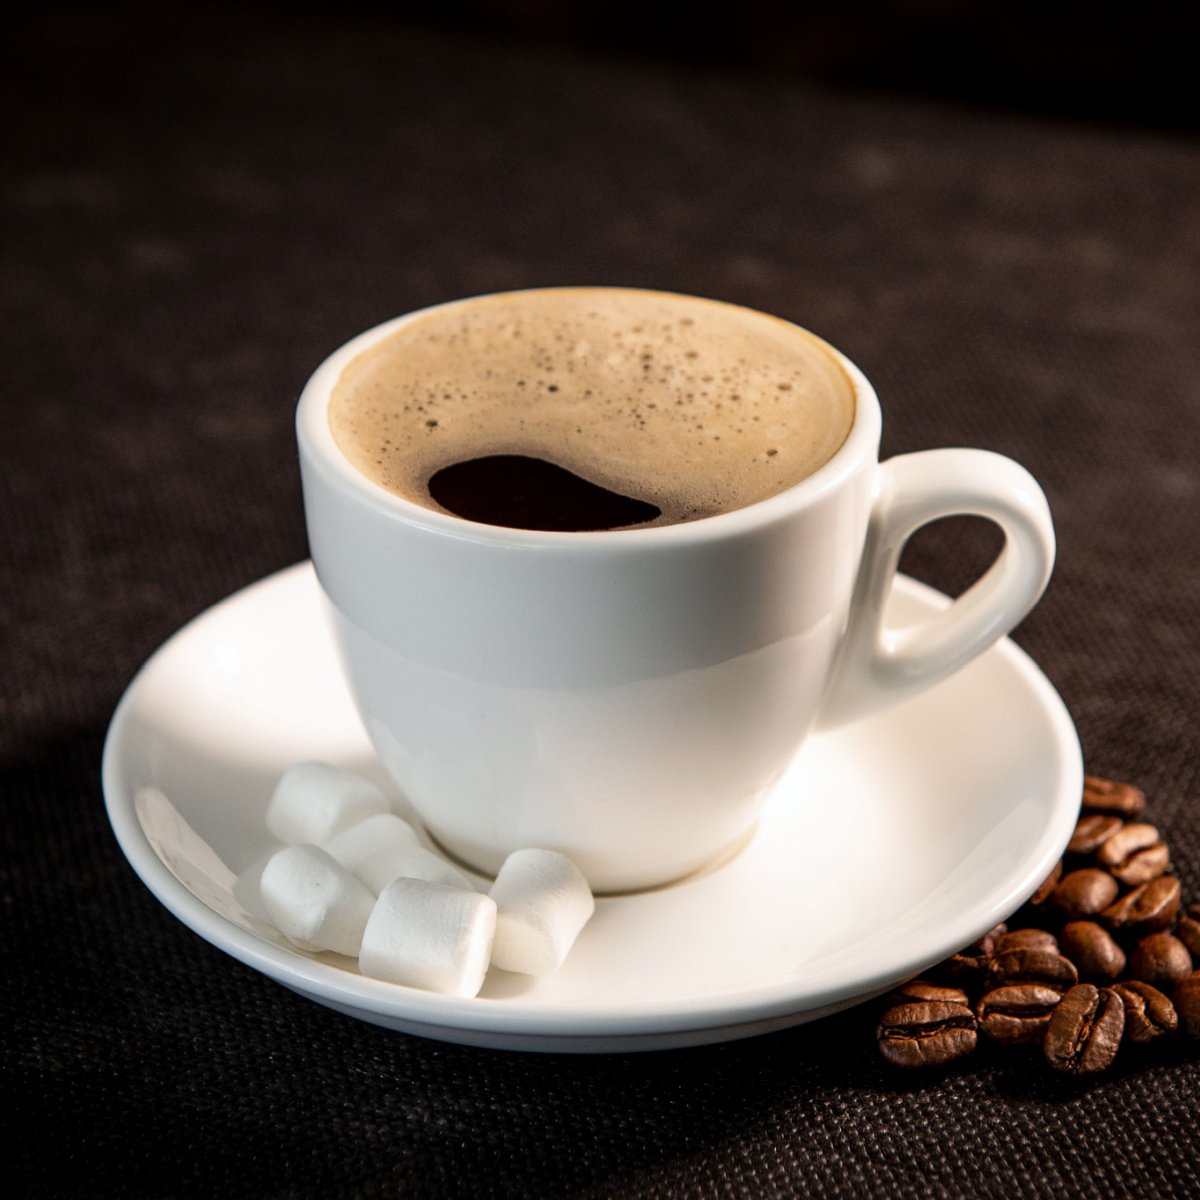 cup of coffee on white saucer with marshmallows and coffee beans